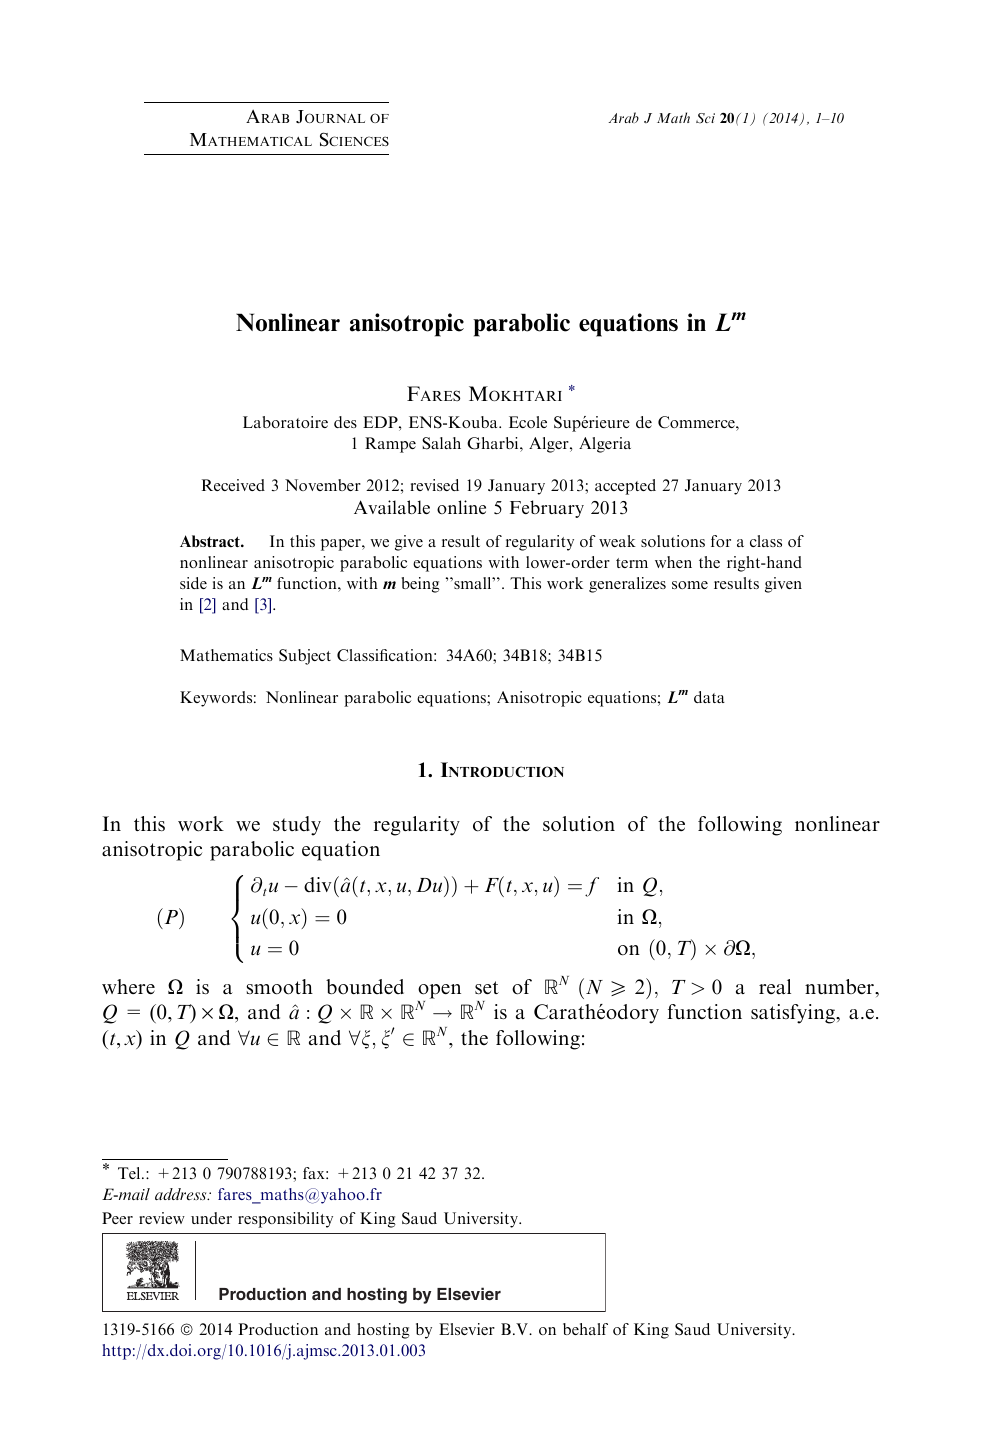 Nonlinear Anisotropic Parabolic Equations In Lm Topic Of Research Paper In Mathematics Download Scholarly Article Pdf And Read For Free On Cyberleninka Open Science Hub